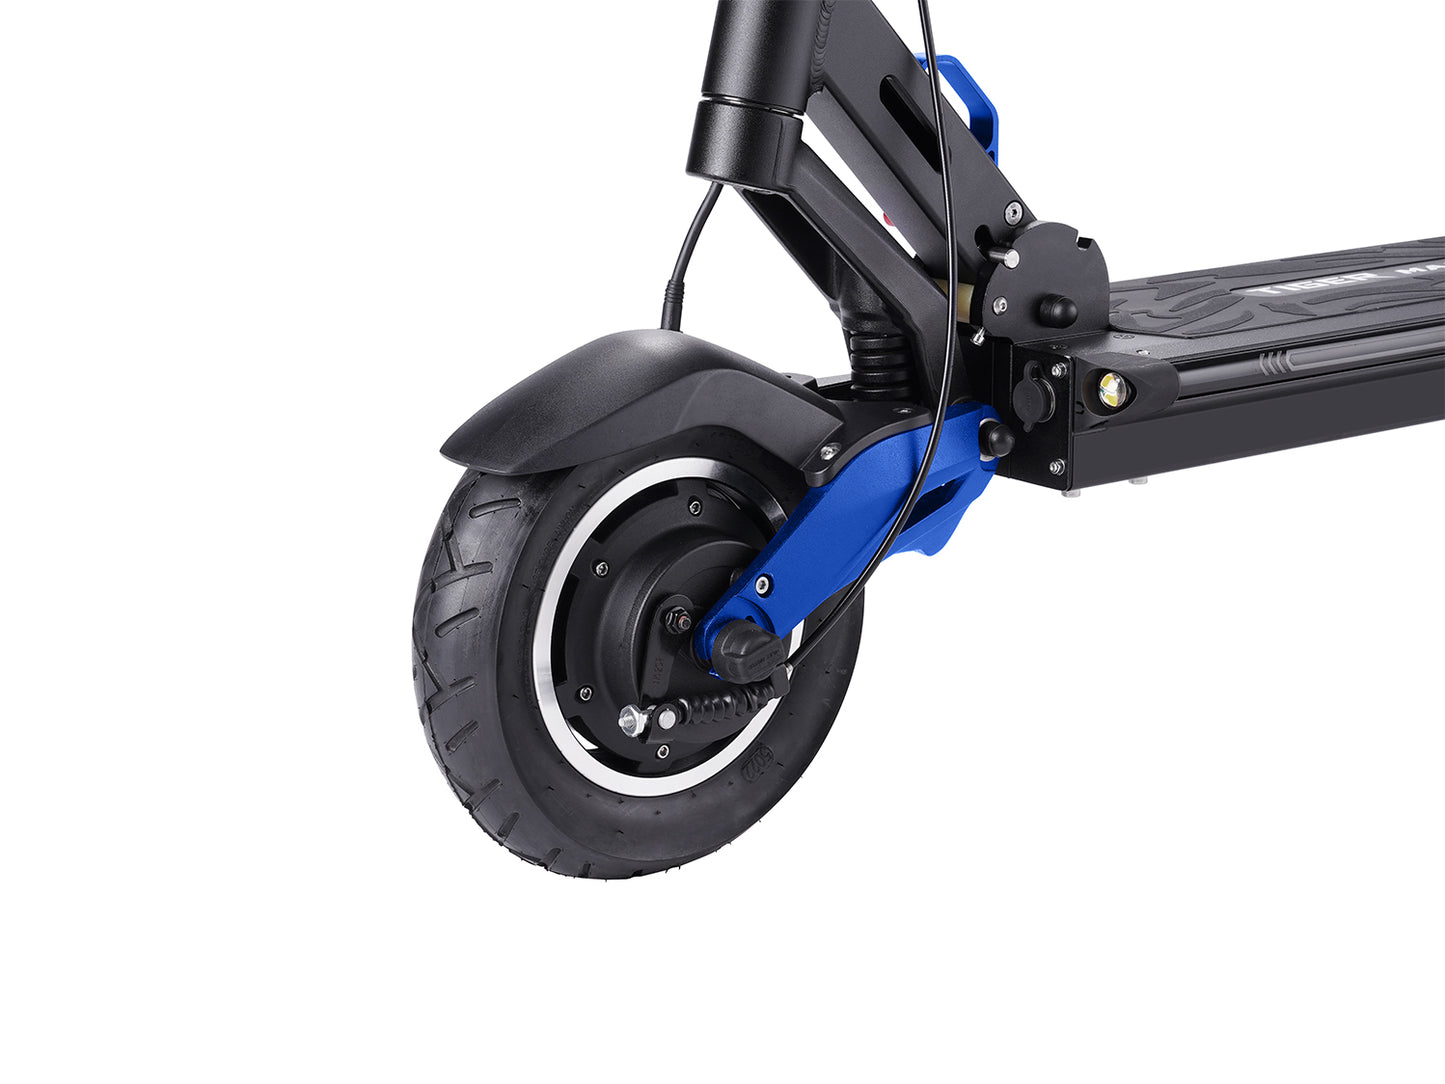 HILEY Tiger Max GTR 800W*2 Electric Scooter